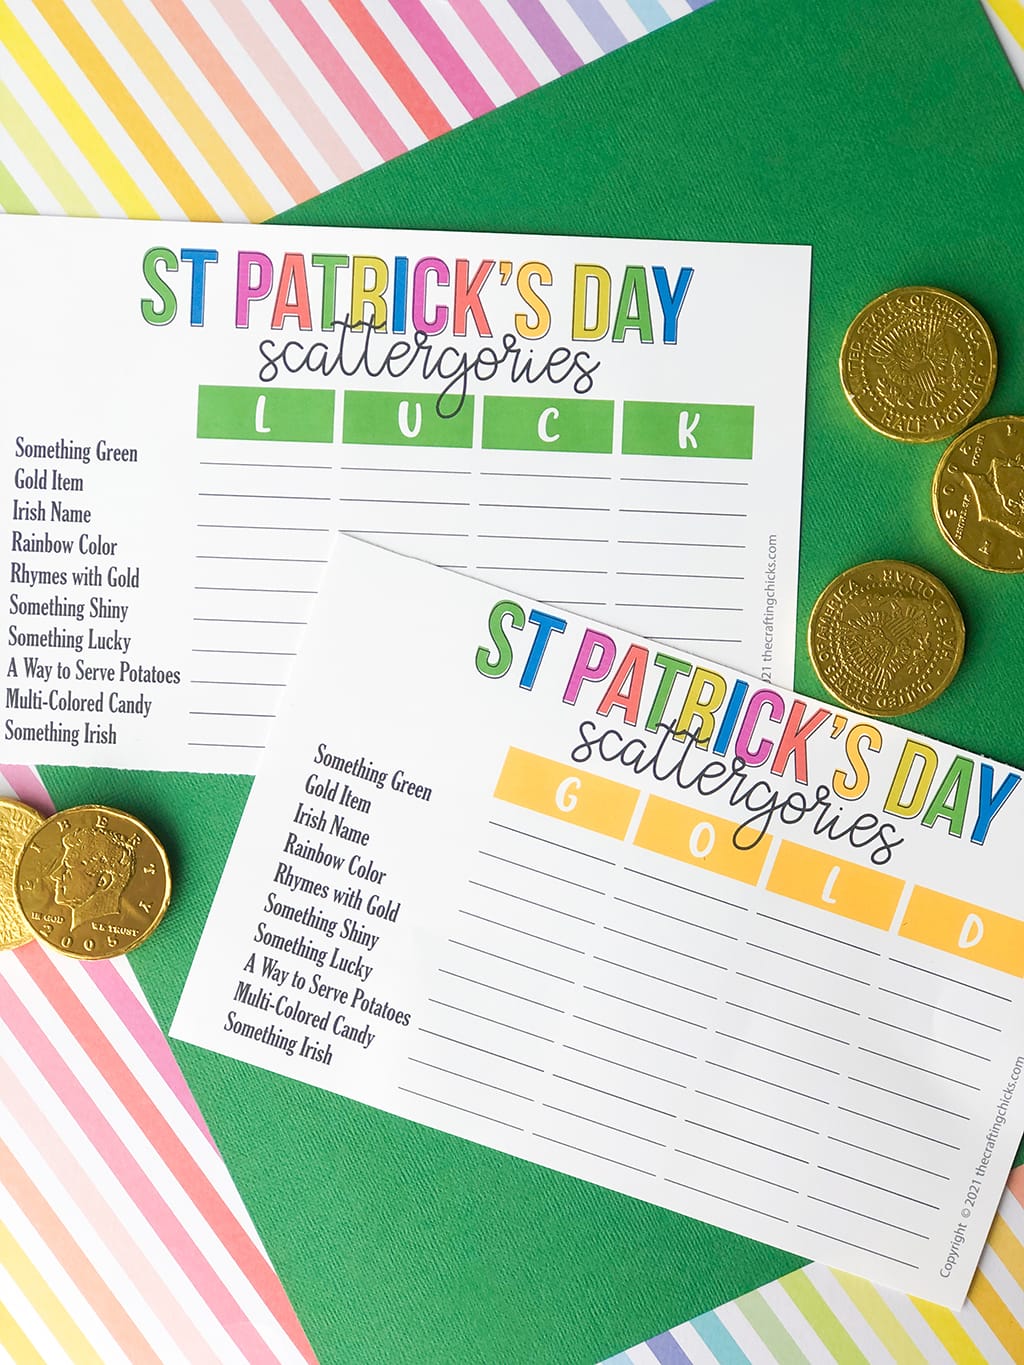 St. Patrick's Day Scattergories on a rainbow colored, and a green paper background with gold coins around.